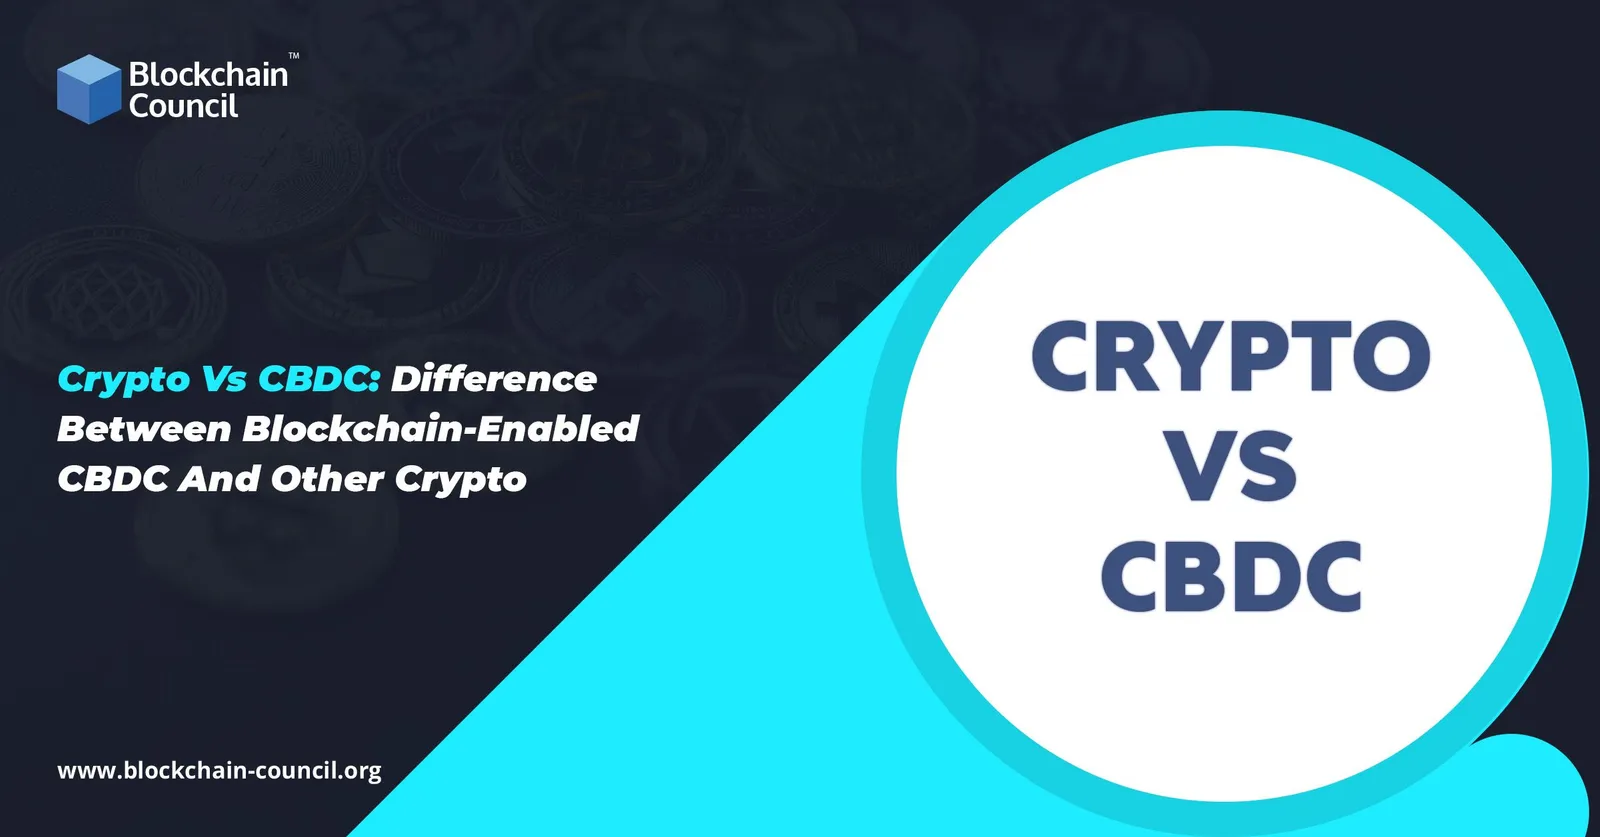 Crypto vs. CBDC: Difference between Blockchain-Enabled CBDC and Other Crypto